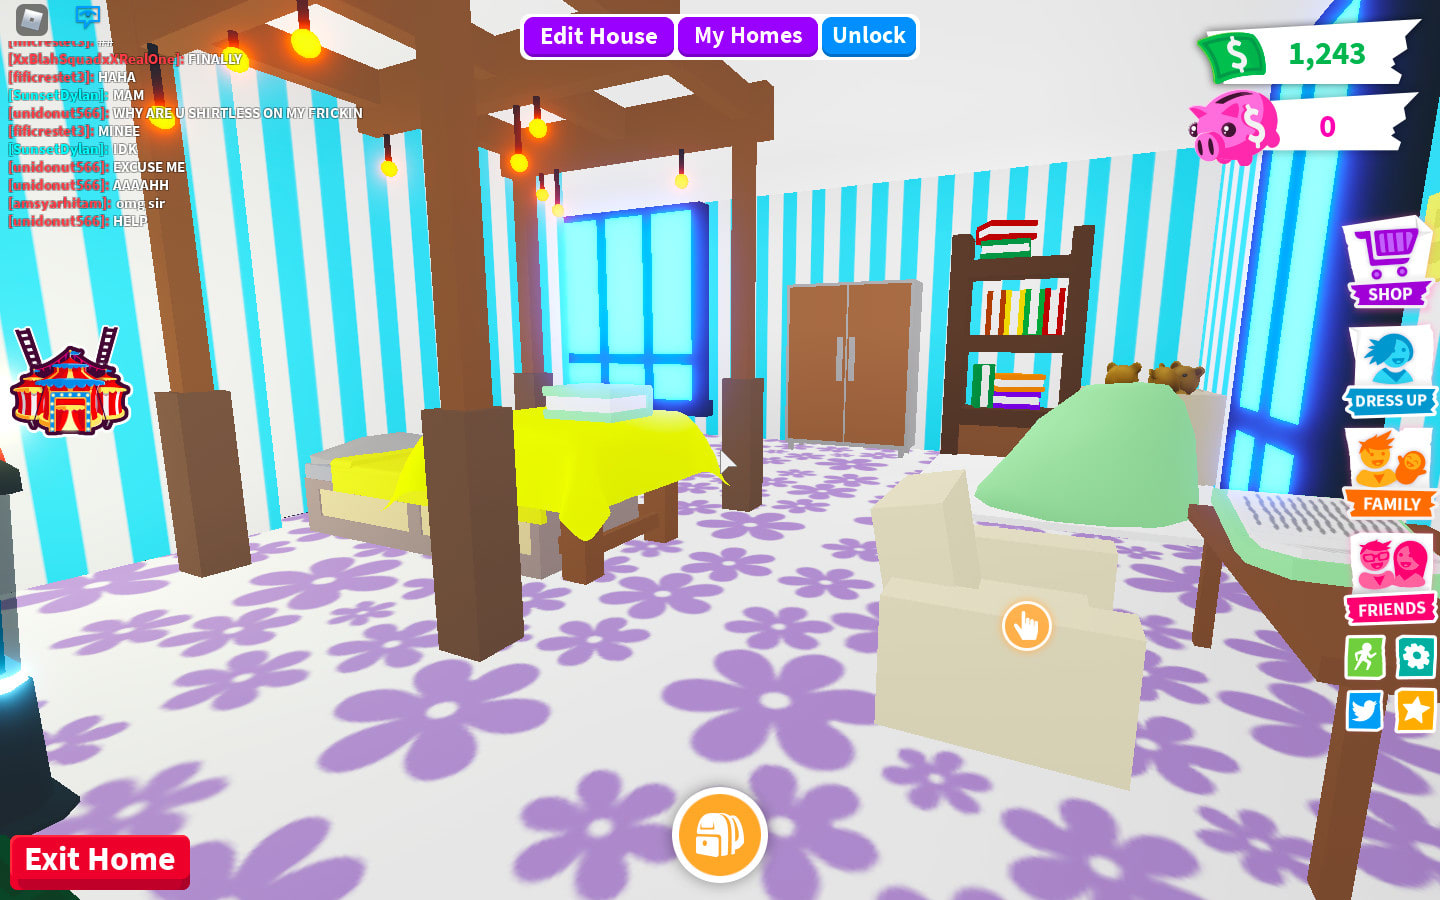 Decorate Your House In Adopt Me Roblox By Glorianneganda - shirtless roblox